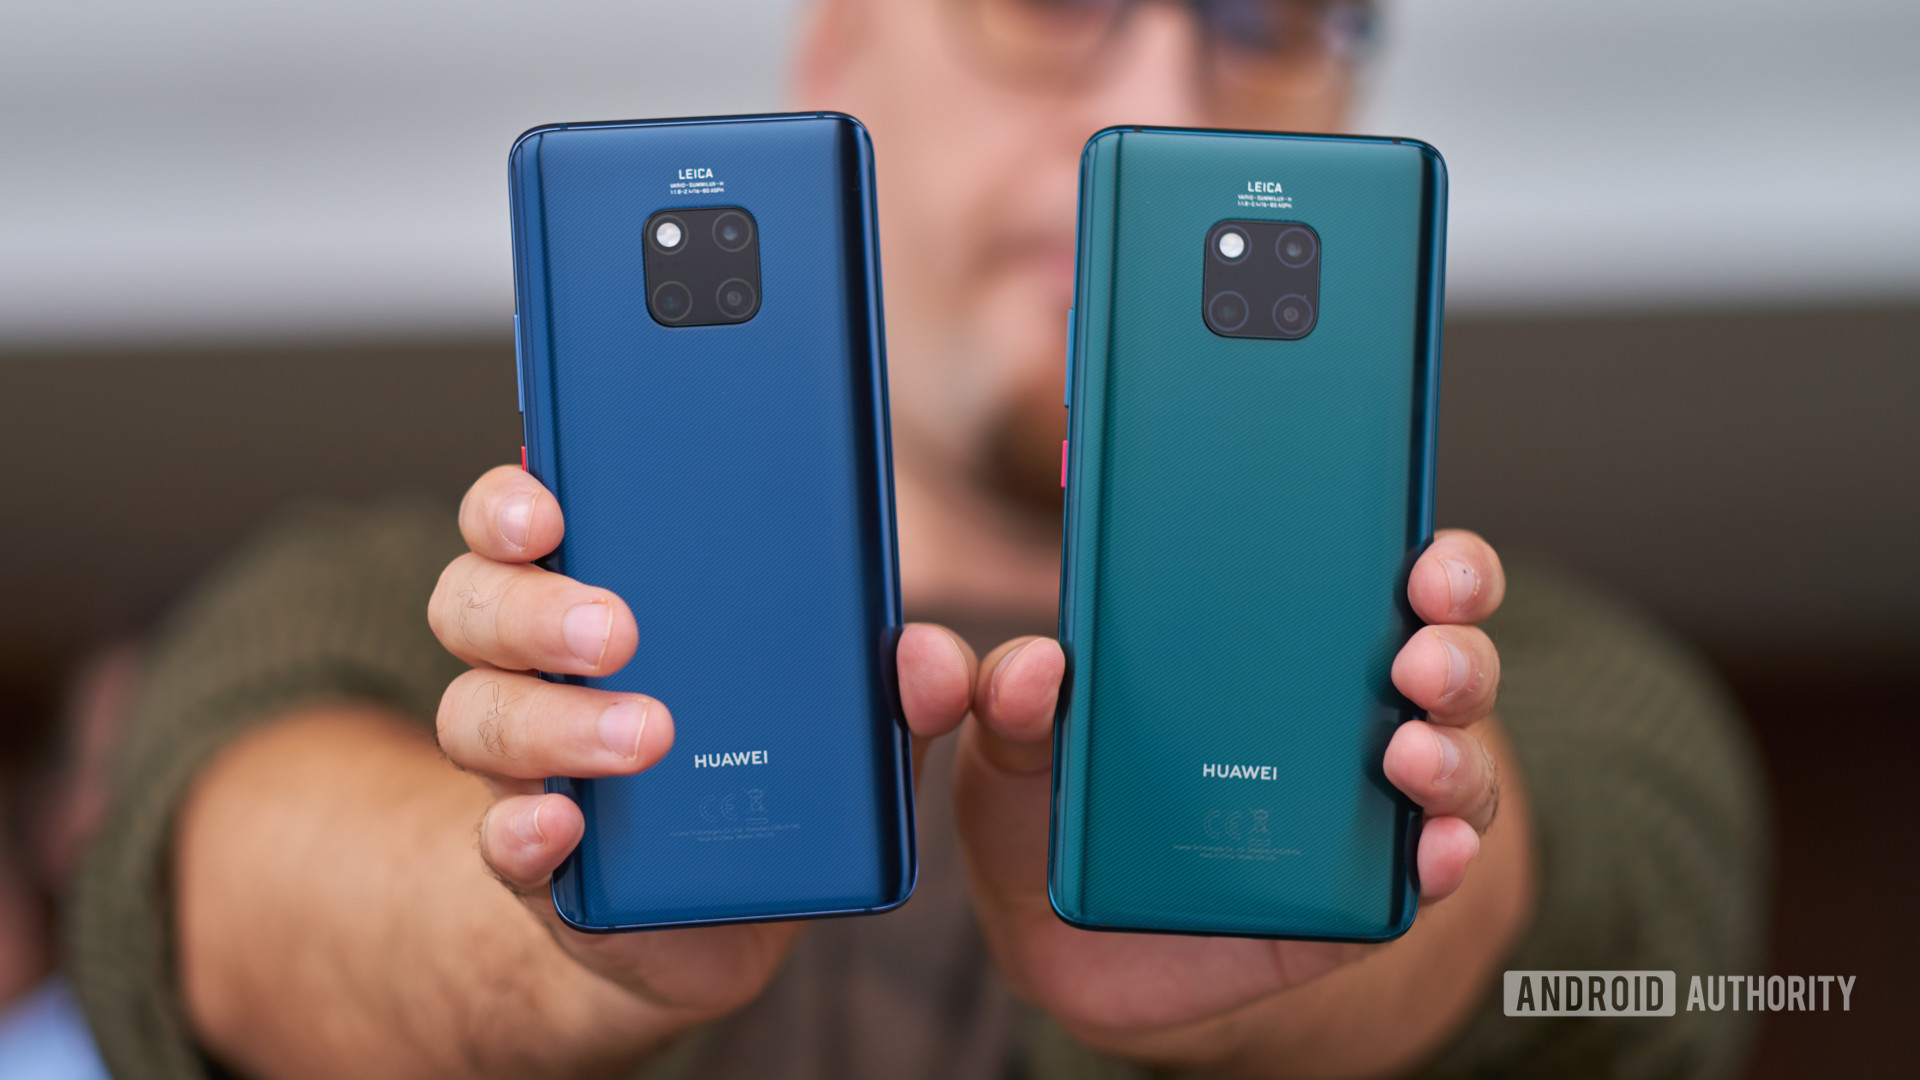 hoekpunt ik draag kleding viering HUAWEI Mate 20 Pro review: The best phone for power users